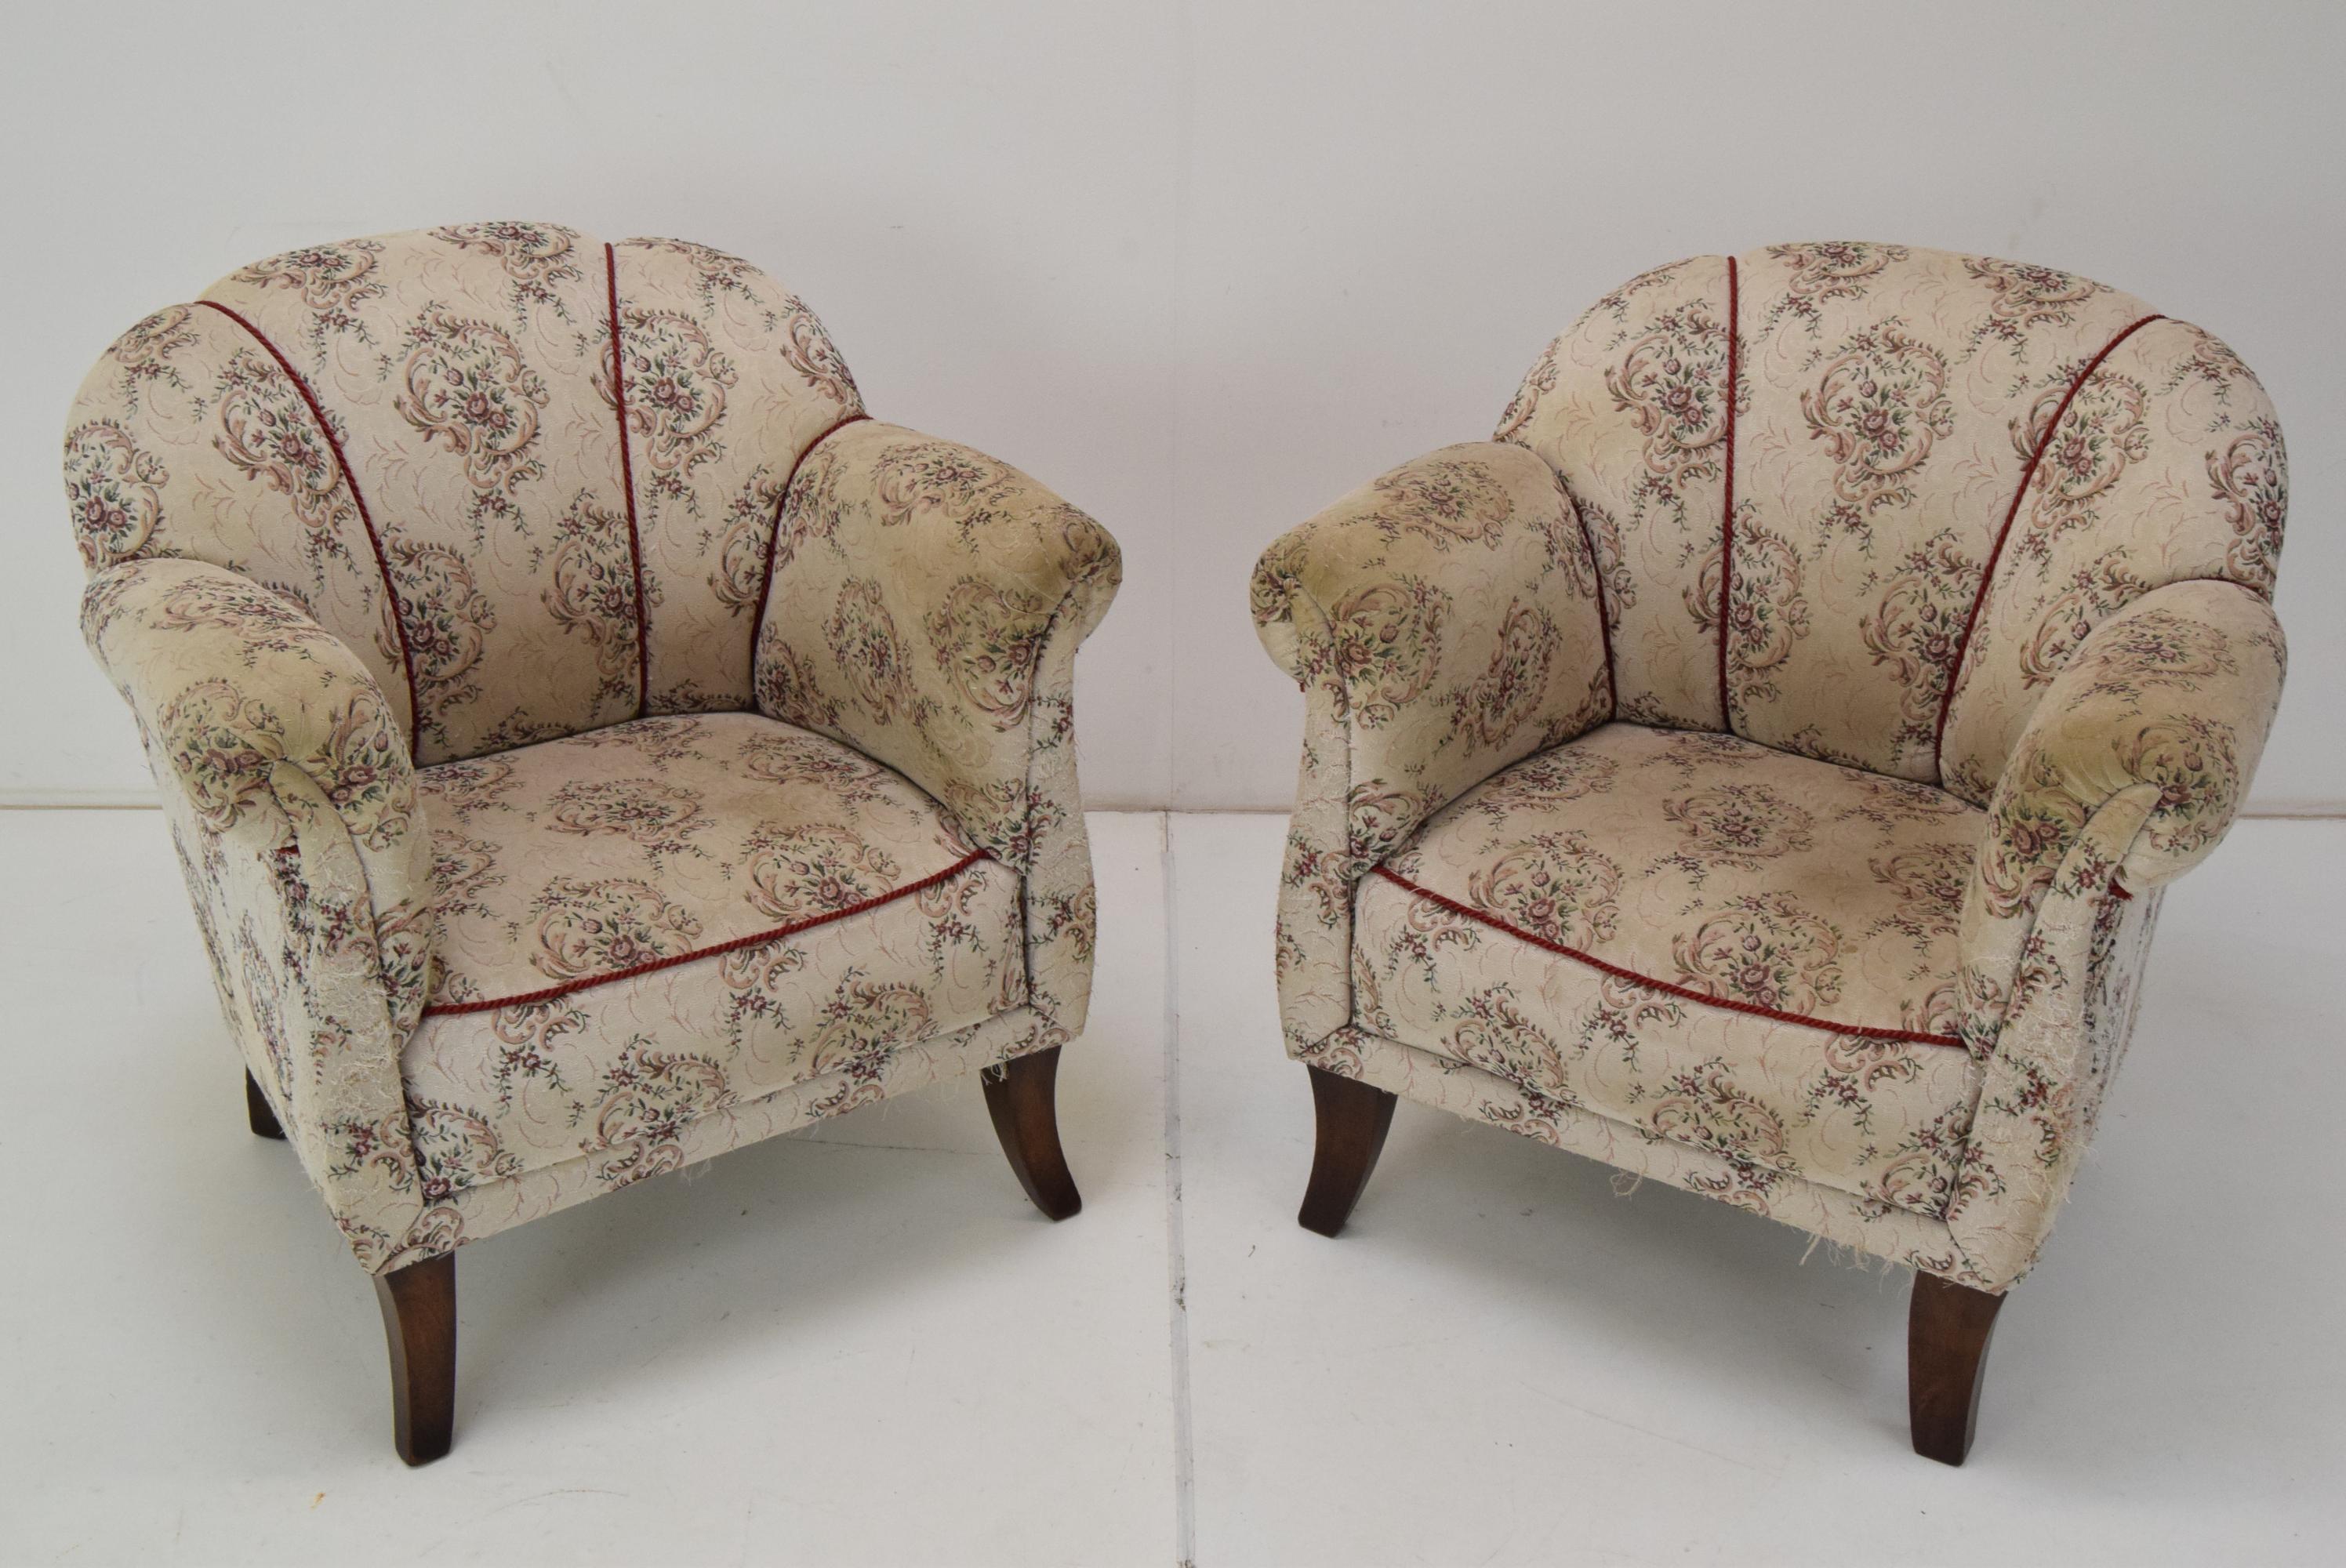 
Made of Fabric,Wood
Armchairs are suitable for reupholstery
The fabric is damaged and dirty in places
The chairs are comfortable
Possible to buy 